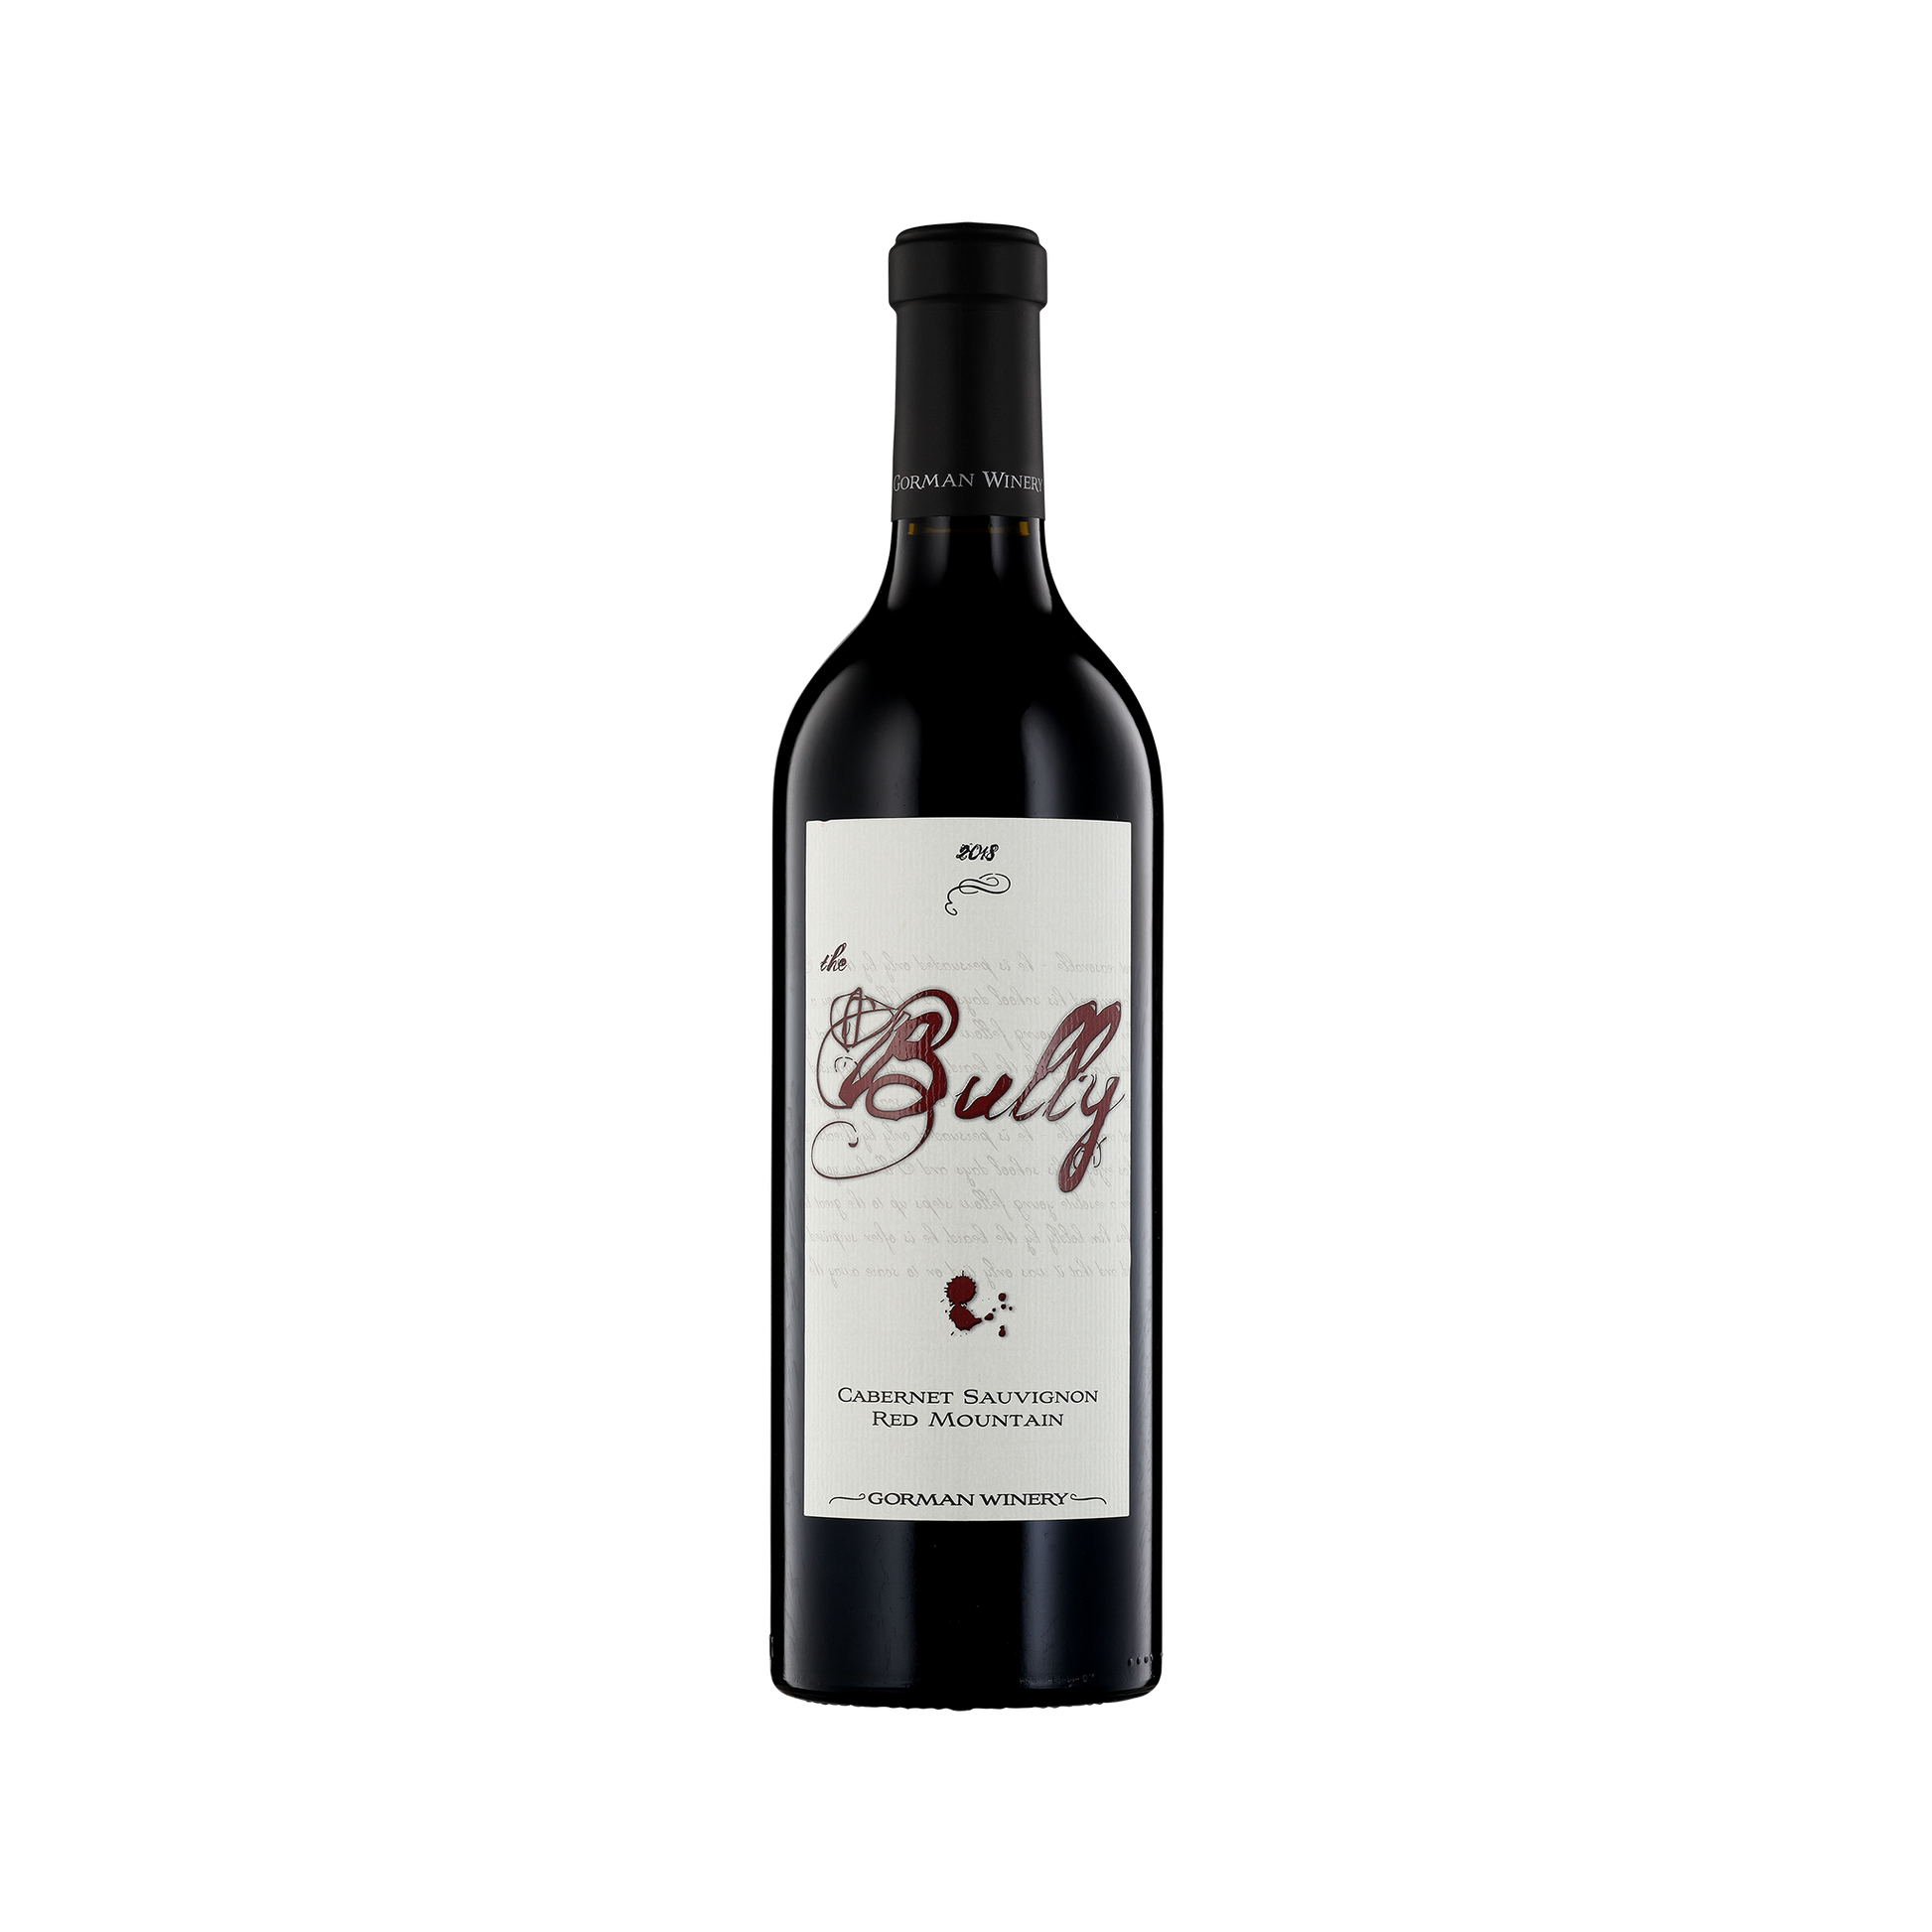 A bottle of Gorman Winery 2018 'The Bully' Cabernet Sauvignon